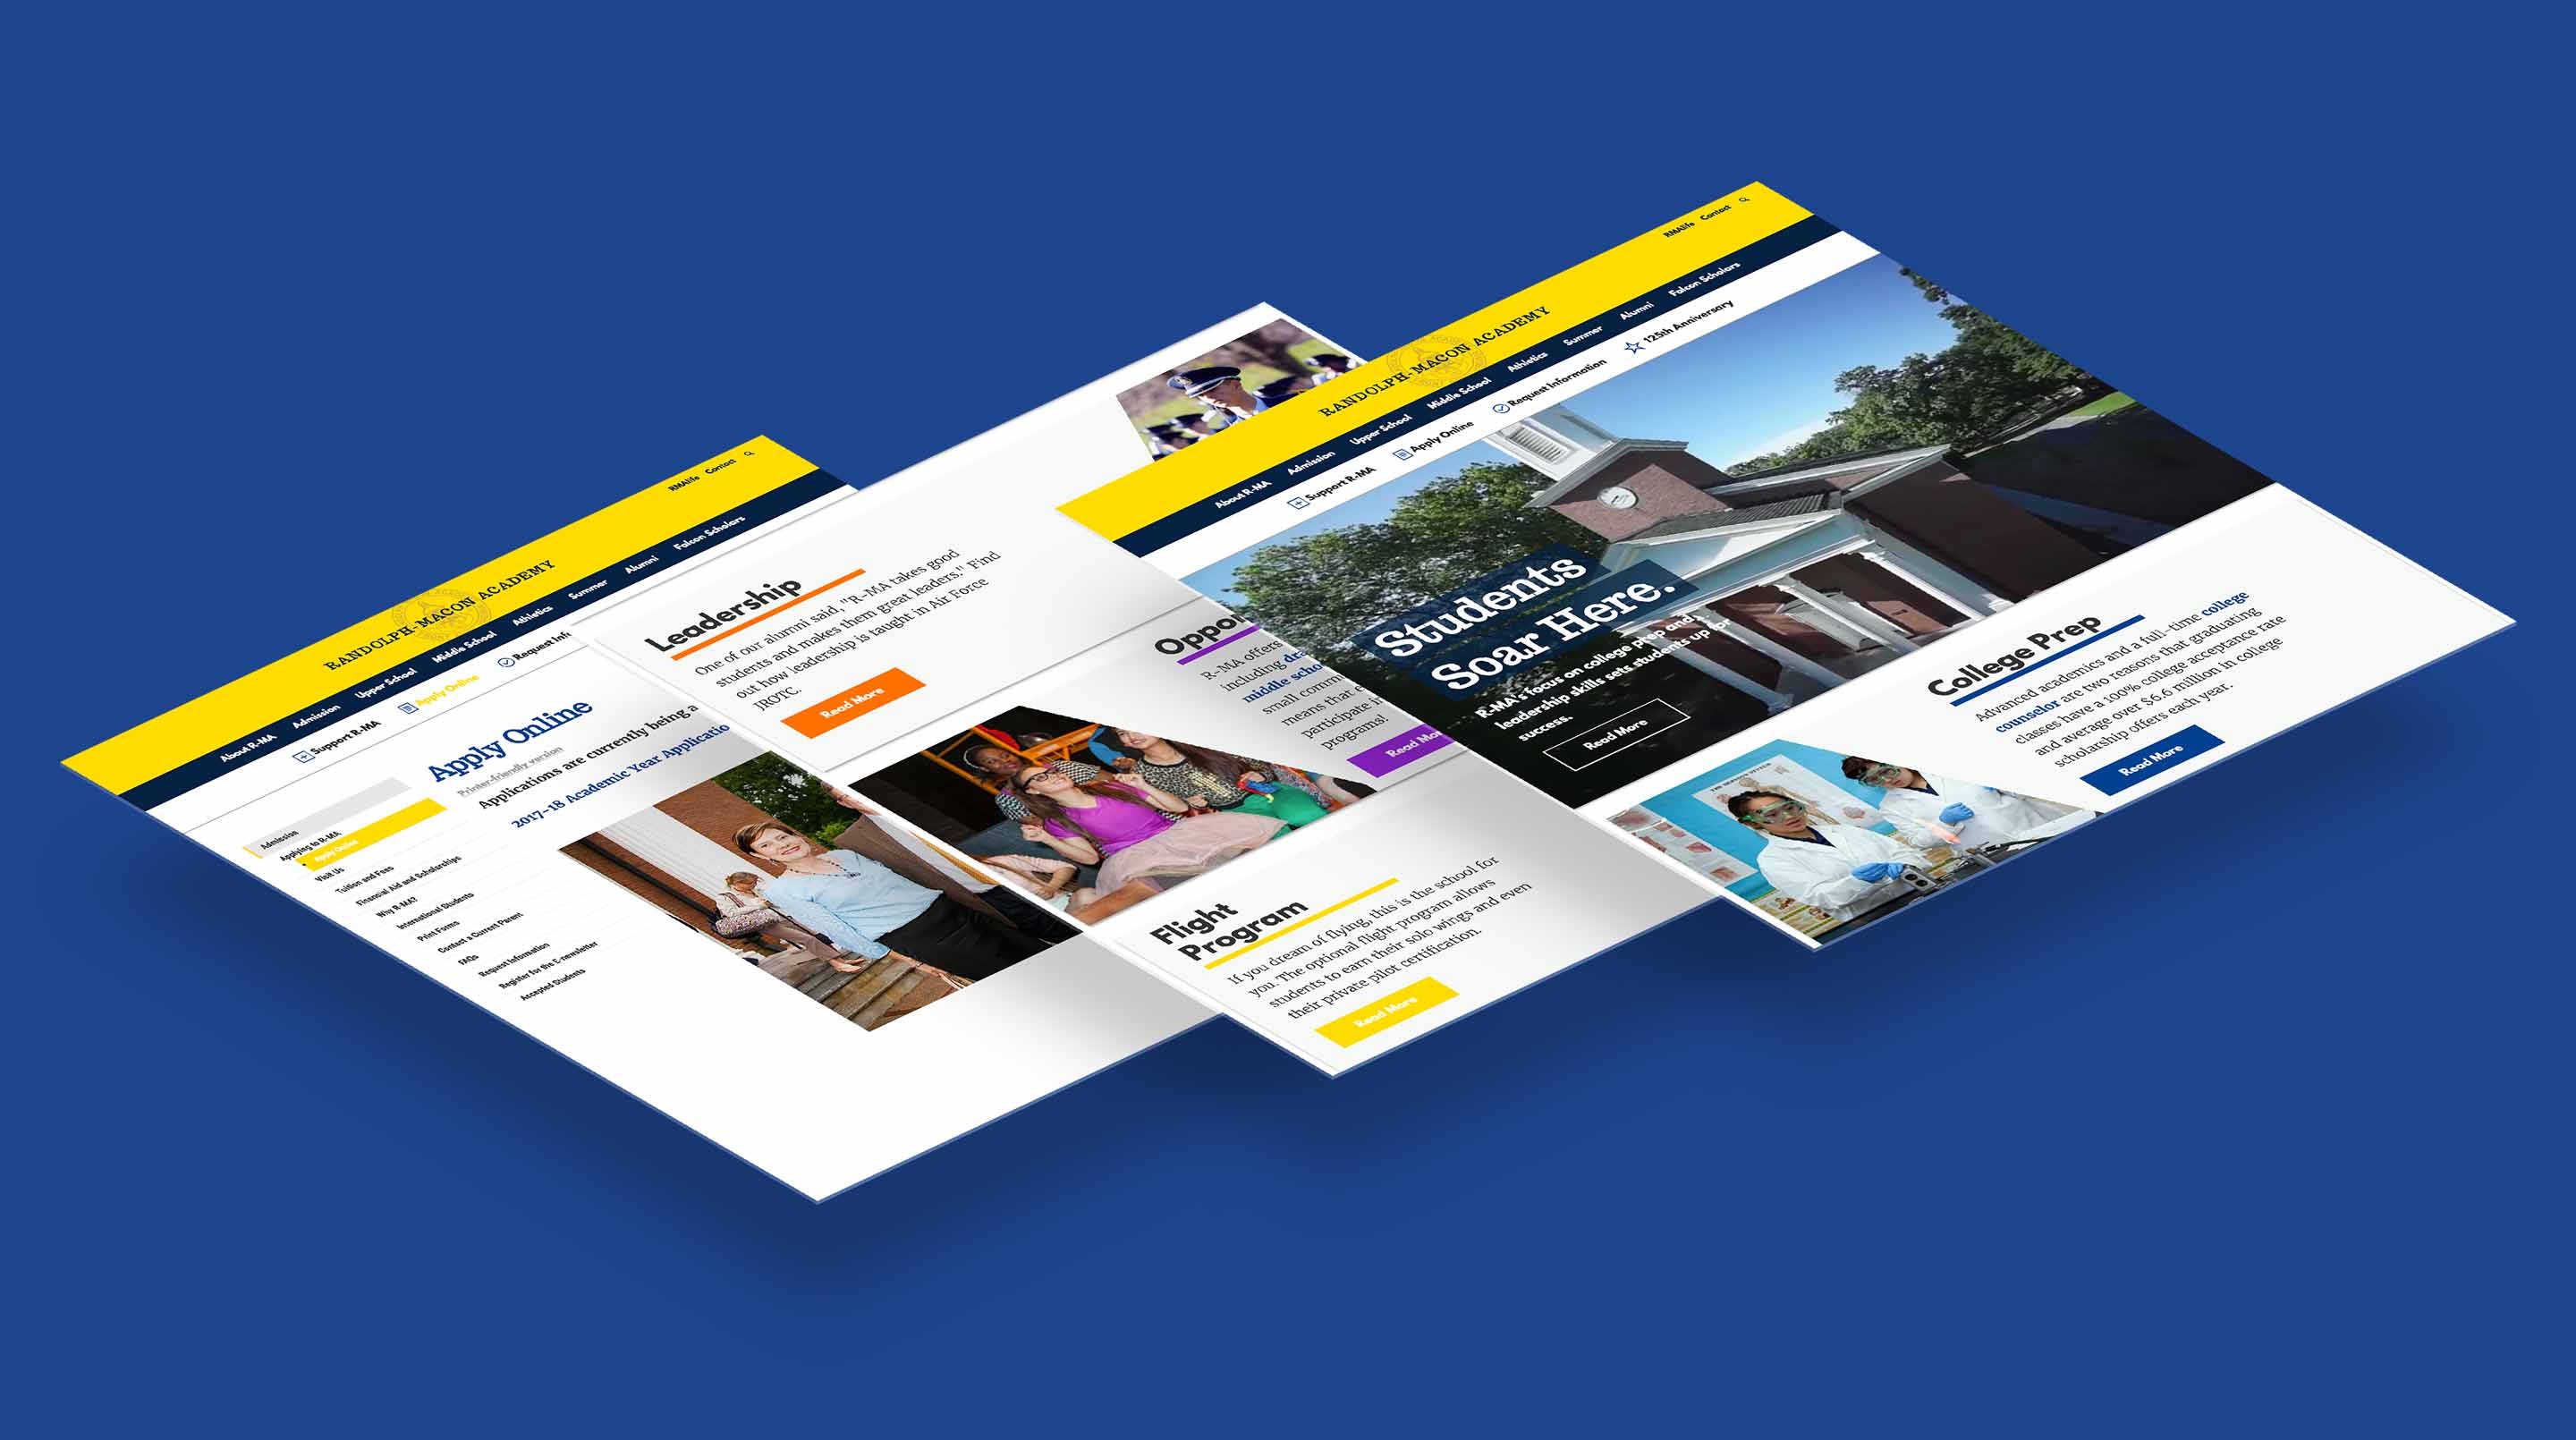 Three layered screens show the landing page and secondary pages of the Randolph-Macon Academy website.